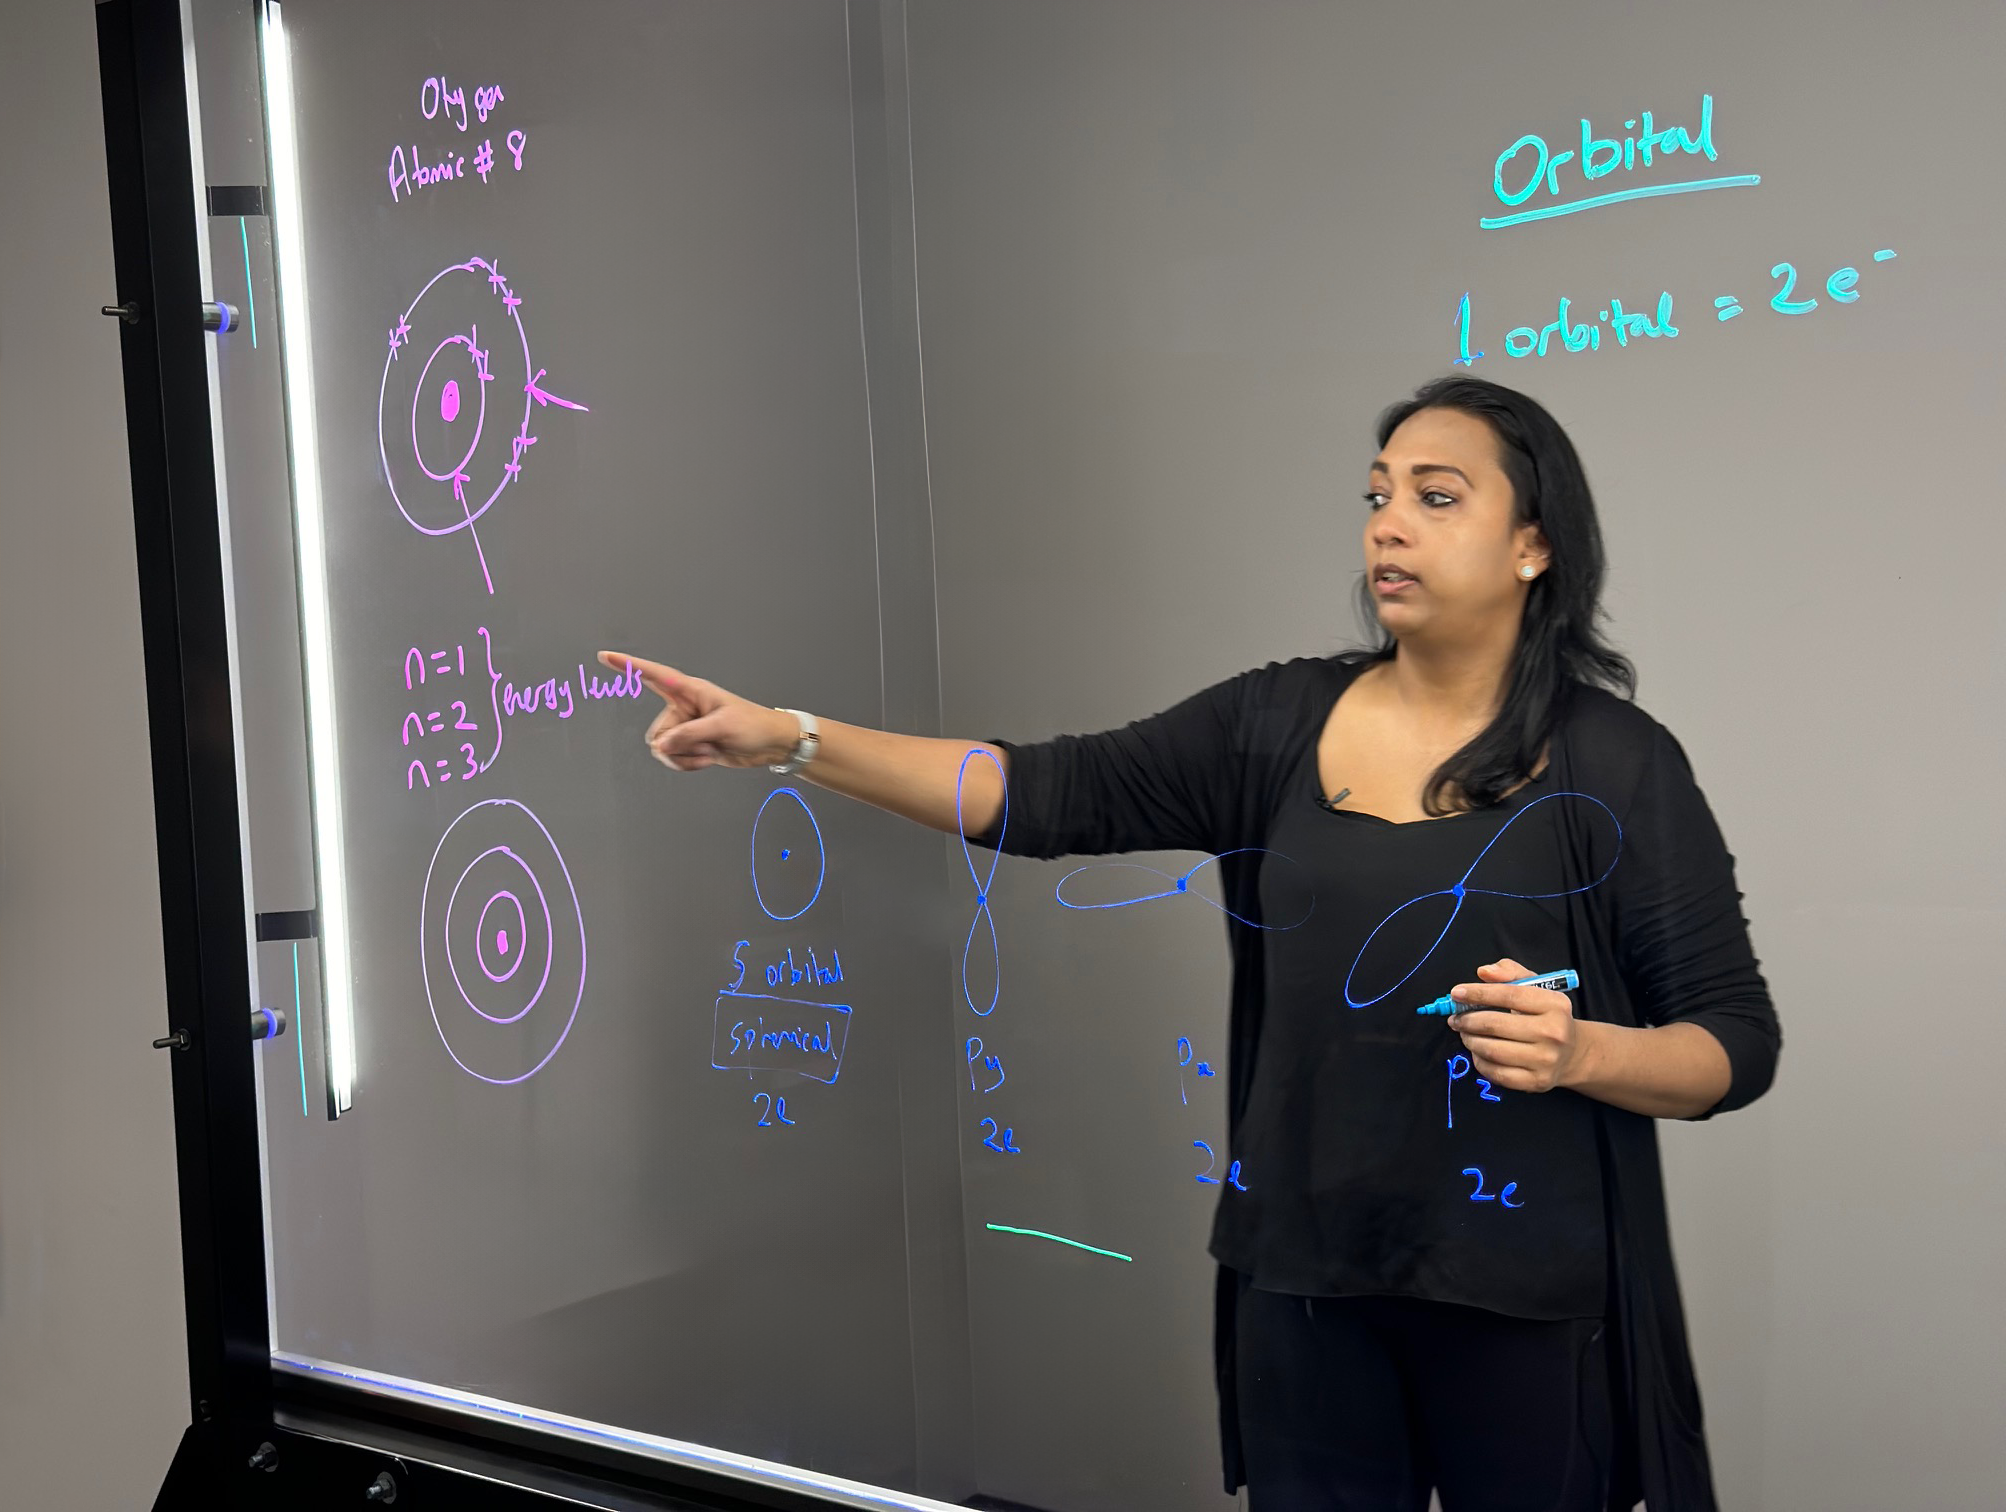 Professor pointing to writing on a light board that shows a Bohr model of the element oxygen.